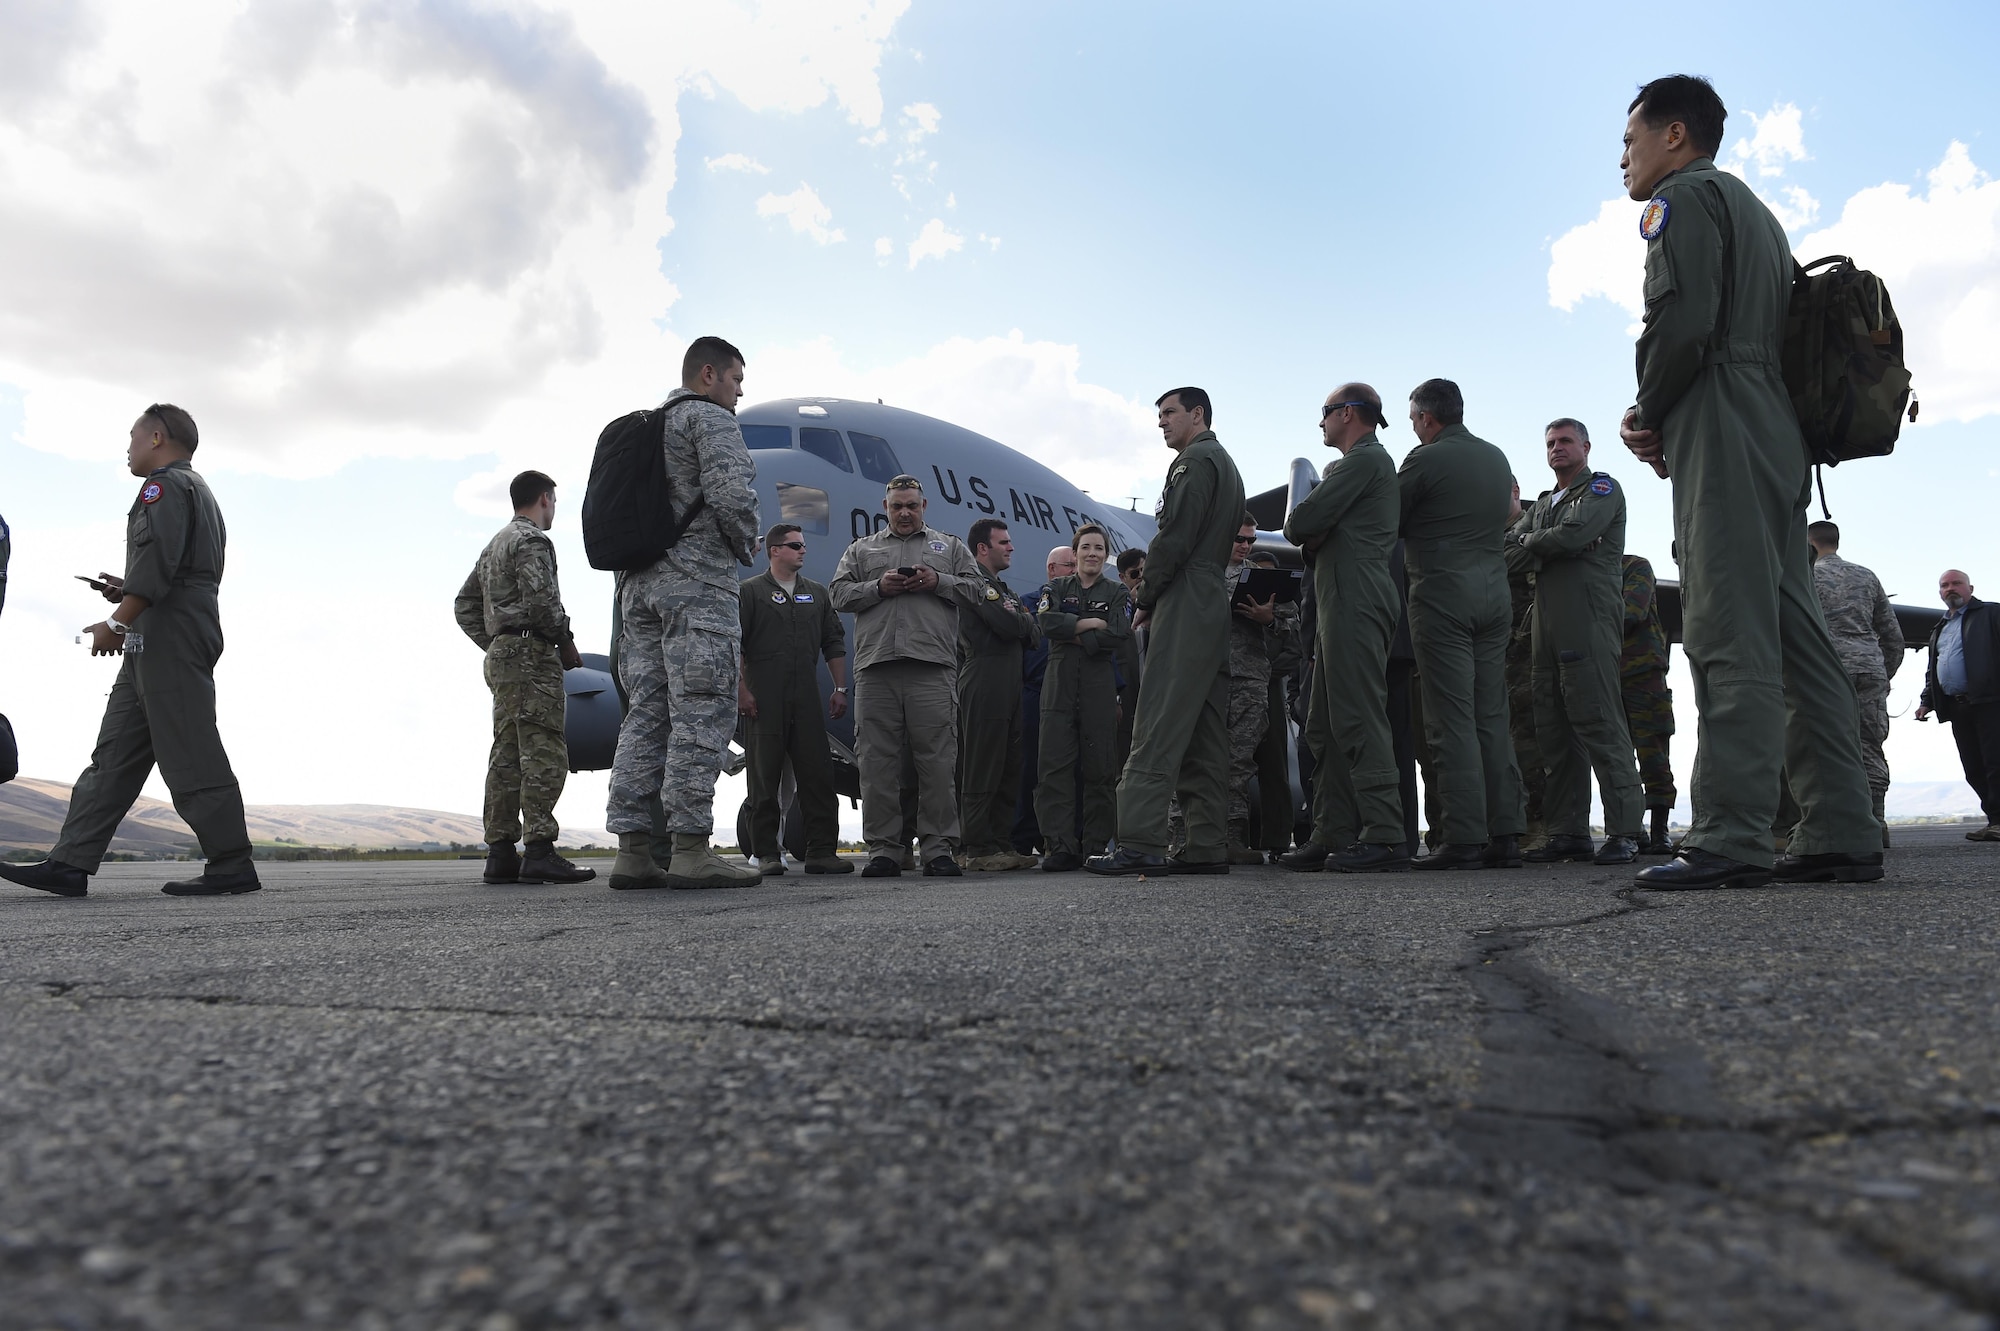 Members of the 62nd Airlift Wing, Air Mobility Command, and international mission partners conduct a site visit Sept. 21, 2016, as part of Air Mobility Command’s Mobility Guardian in progress review at Joint Base Lewis-McChord, Washington. The group of 50 plus members spent a week at JBLM planning their integration into the exercise. (Air Force photo/ Staff Sgt. Naomi Shipley)